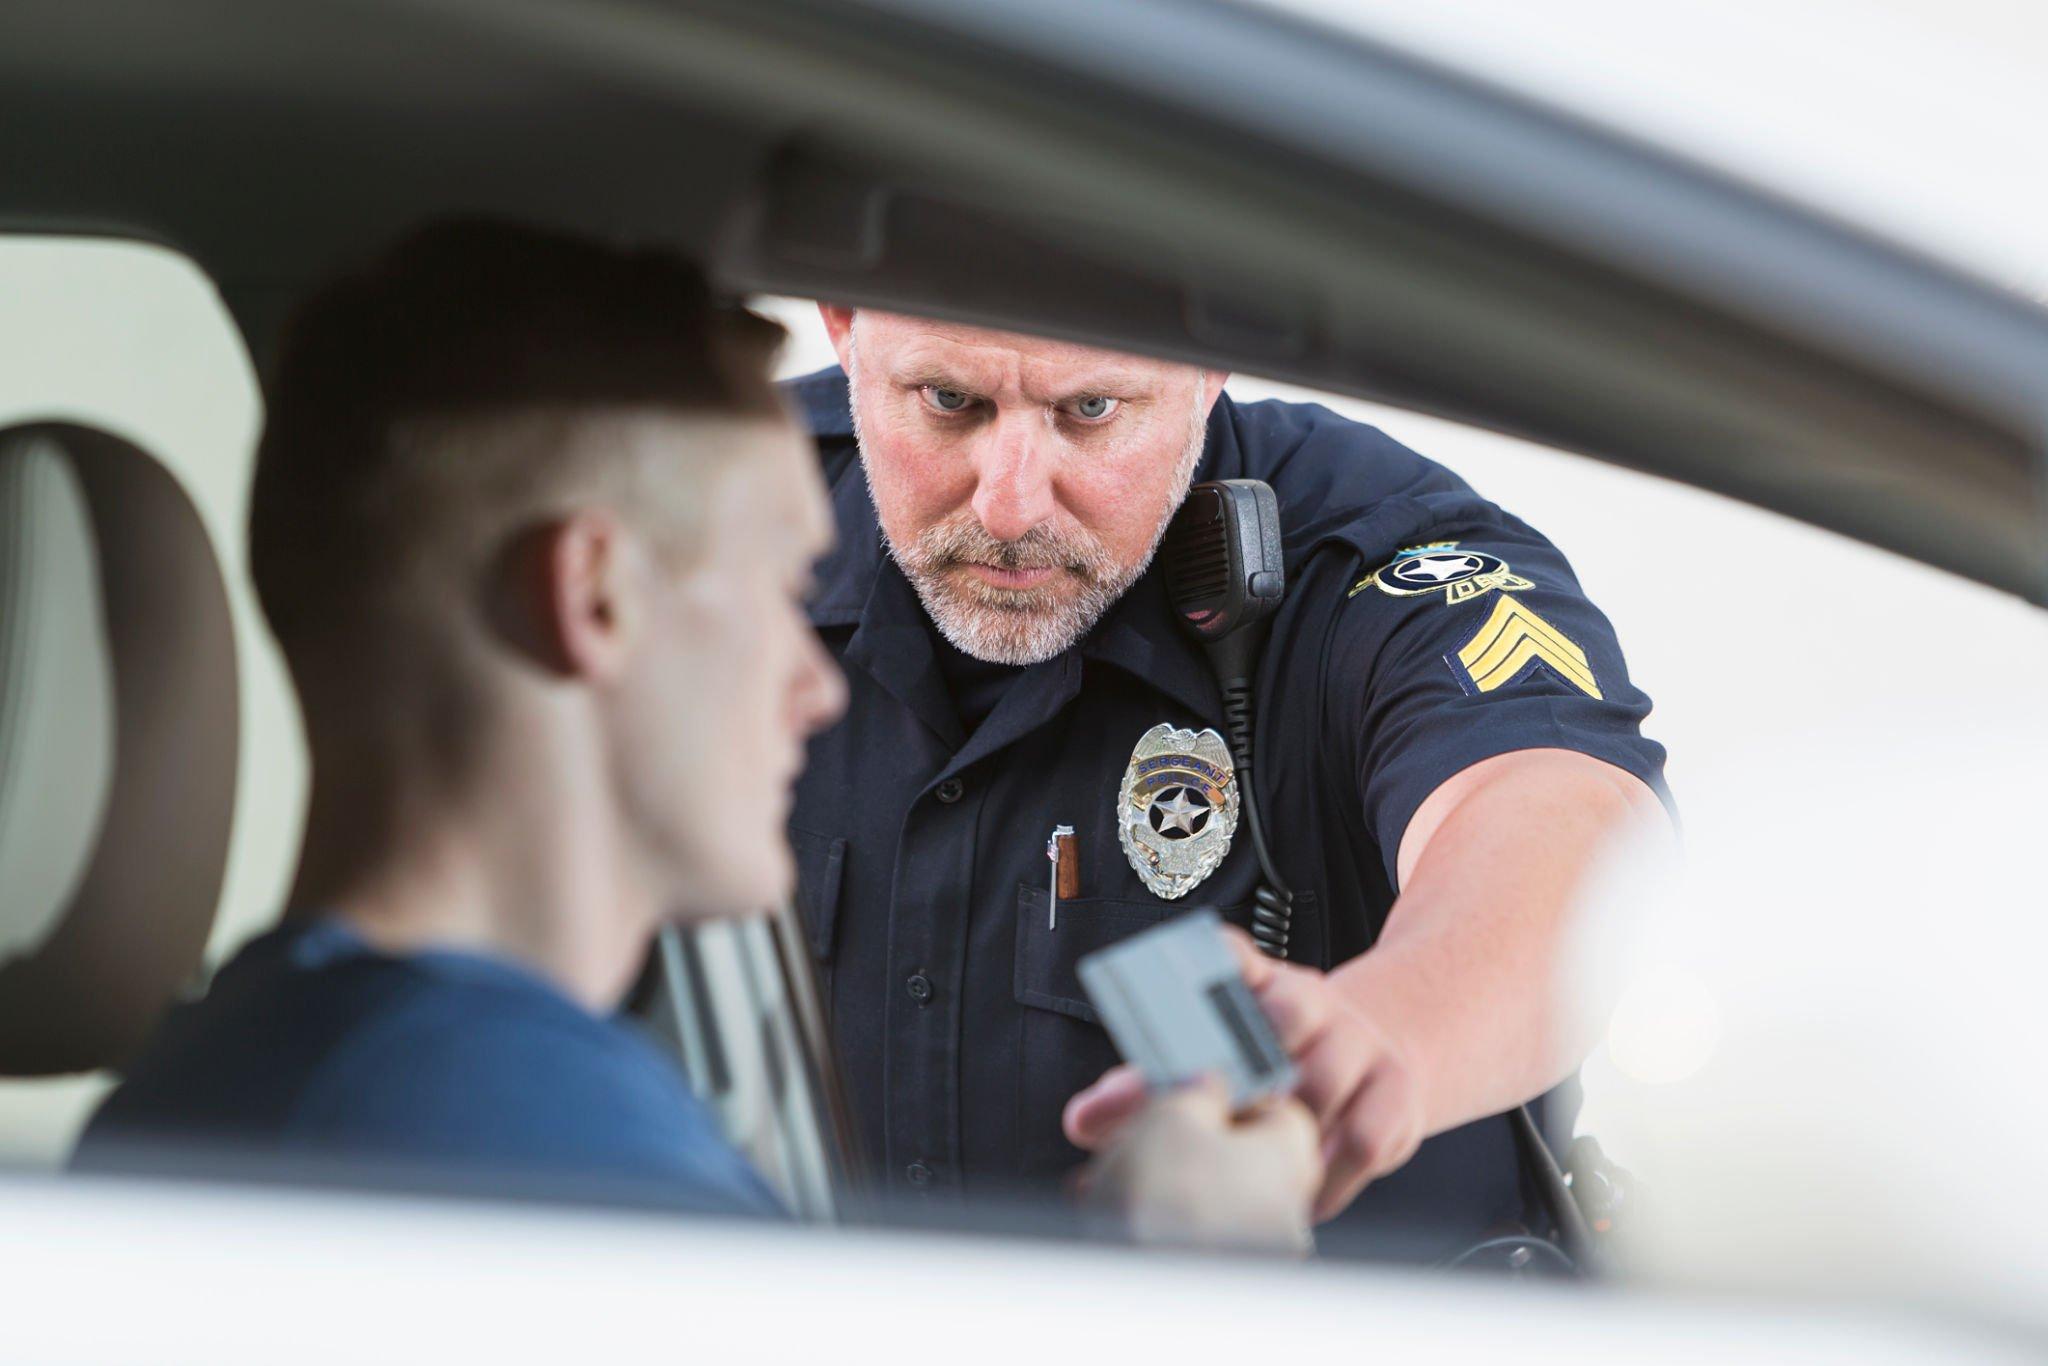 Know About Different Types of DUI – To Protect Your Rights and Freedom